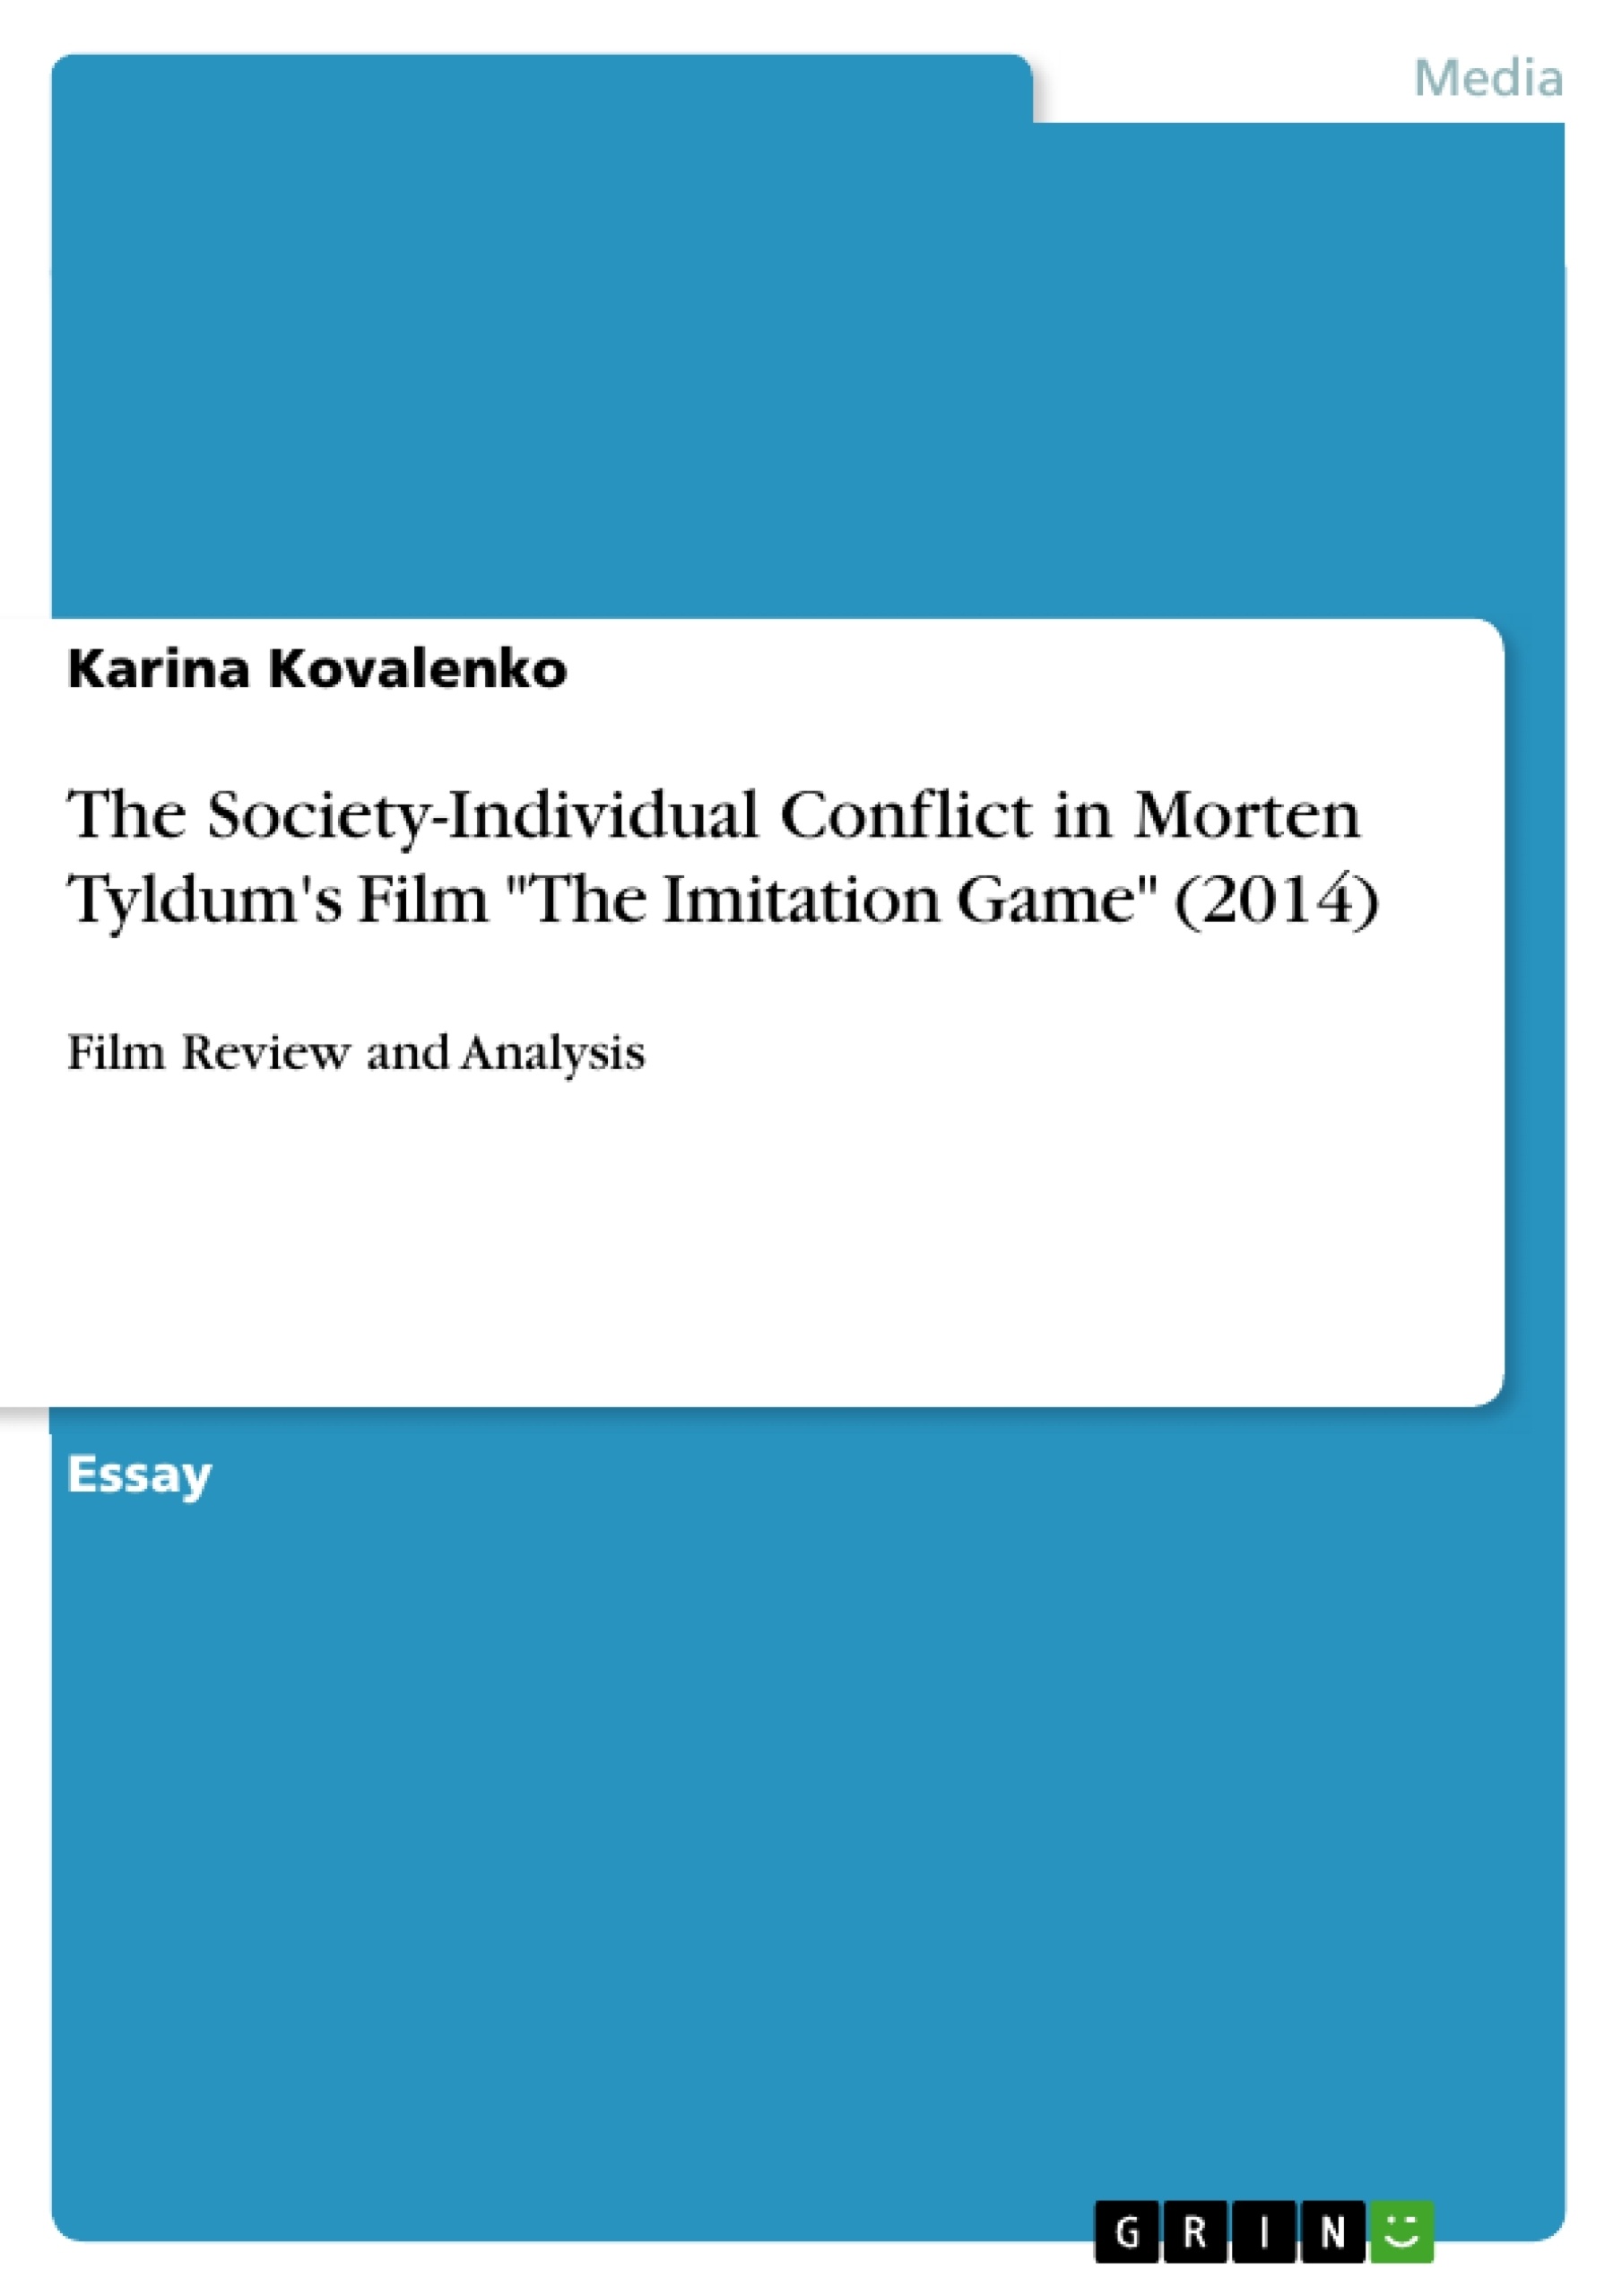 Título: The Society-Individual Conflict in Morten Tyldum's Film "The Imitation Game" (2014)